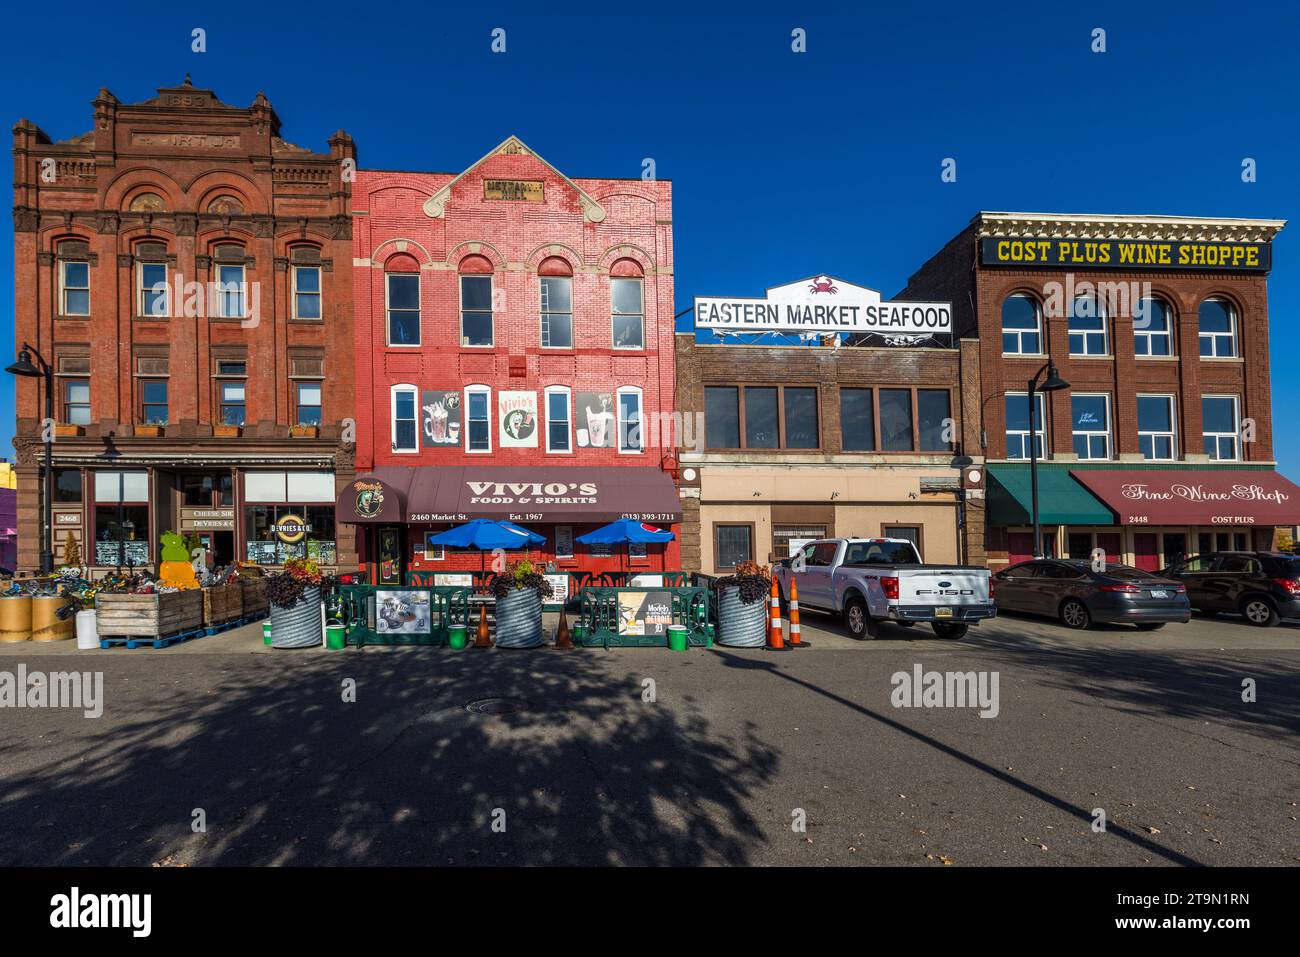 Row of houses at Eastern Market Detroit. The largest open-air farmers' market in Michigan was founded in 1841 and moved to its current location in 1891. Food Eastern Market in Detroit, United States Stock Photo